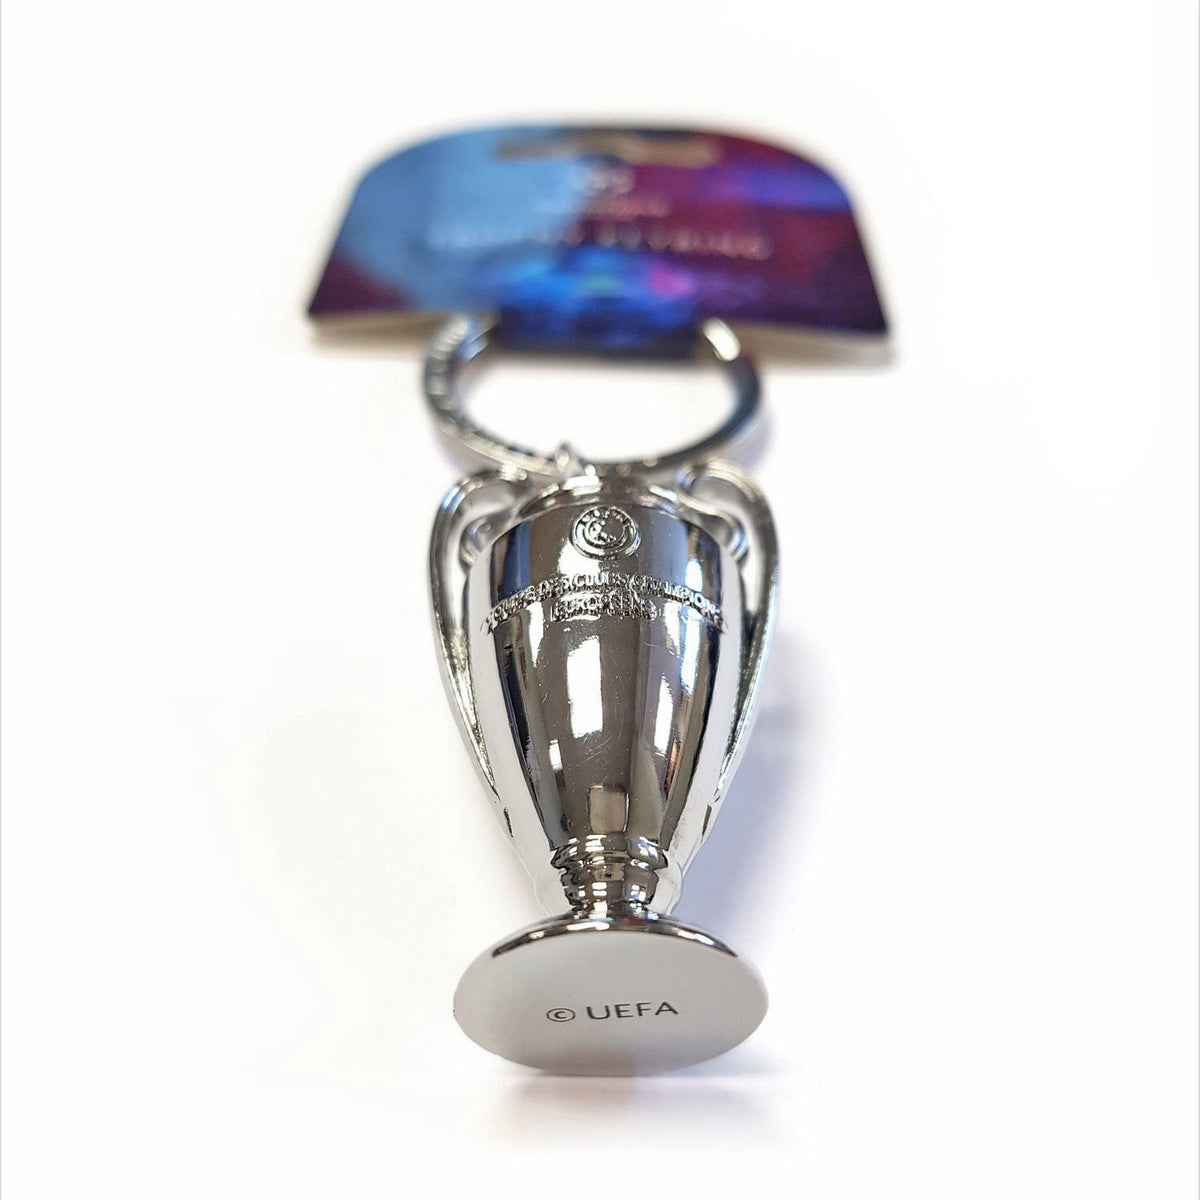 UEFA Champions League Keyring UEFA Club Competitions Online Store